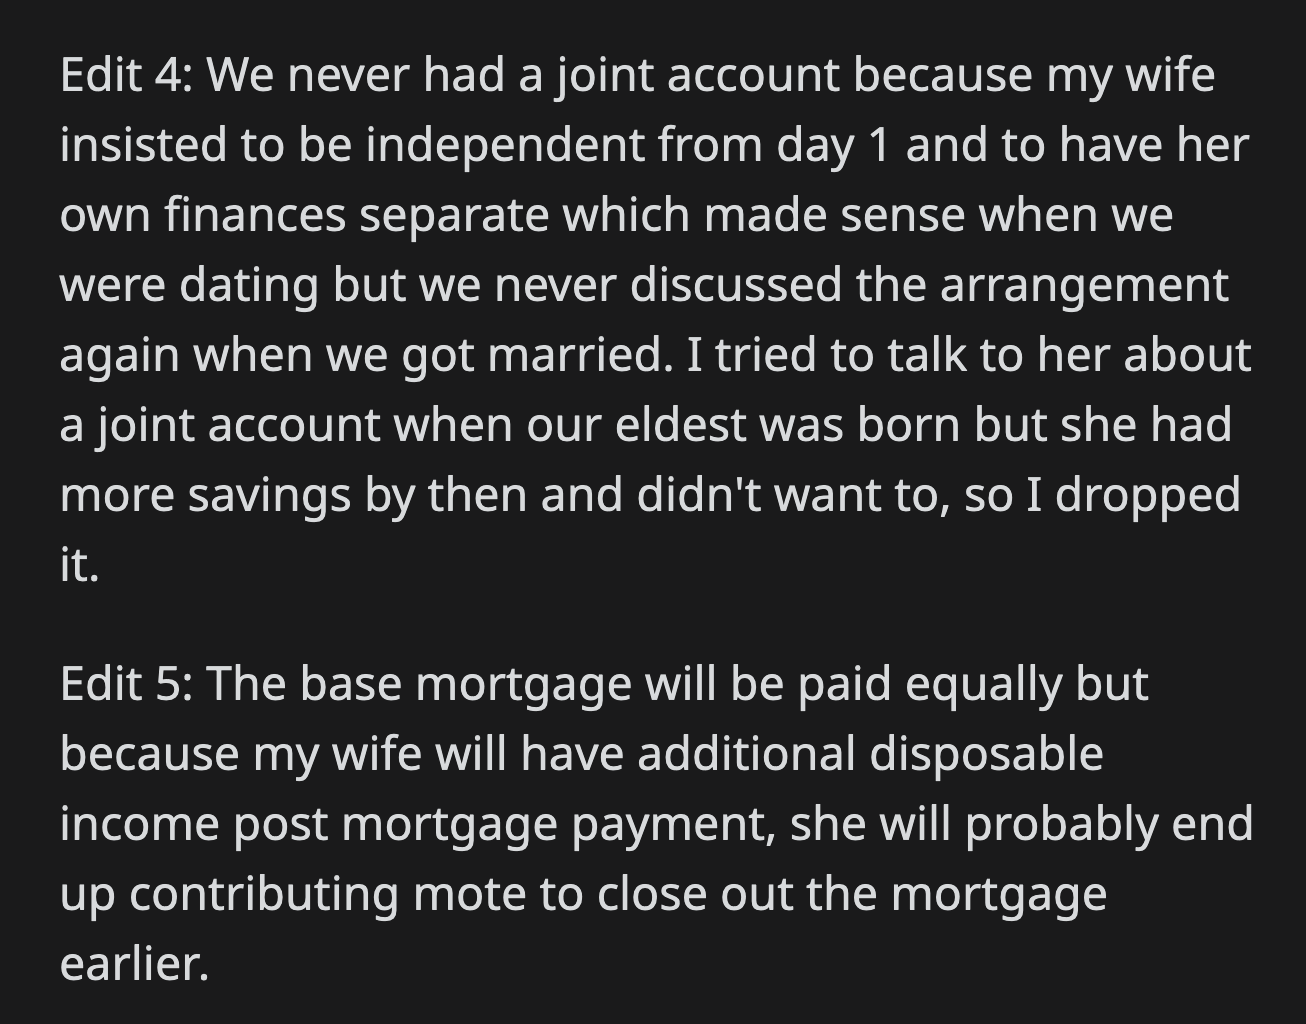 OP said if they closed on the house, they would equally pay for the base mortgage but his wife would pay off the remainder and, thus, contribute more.